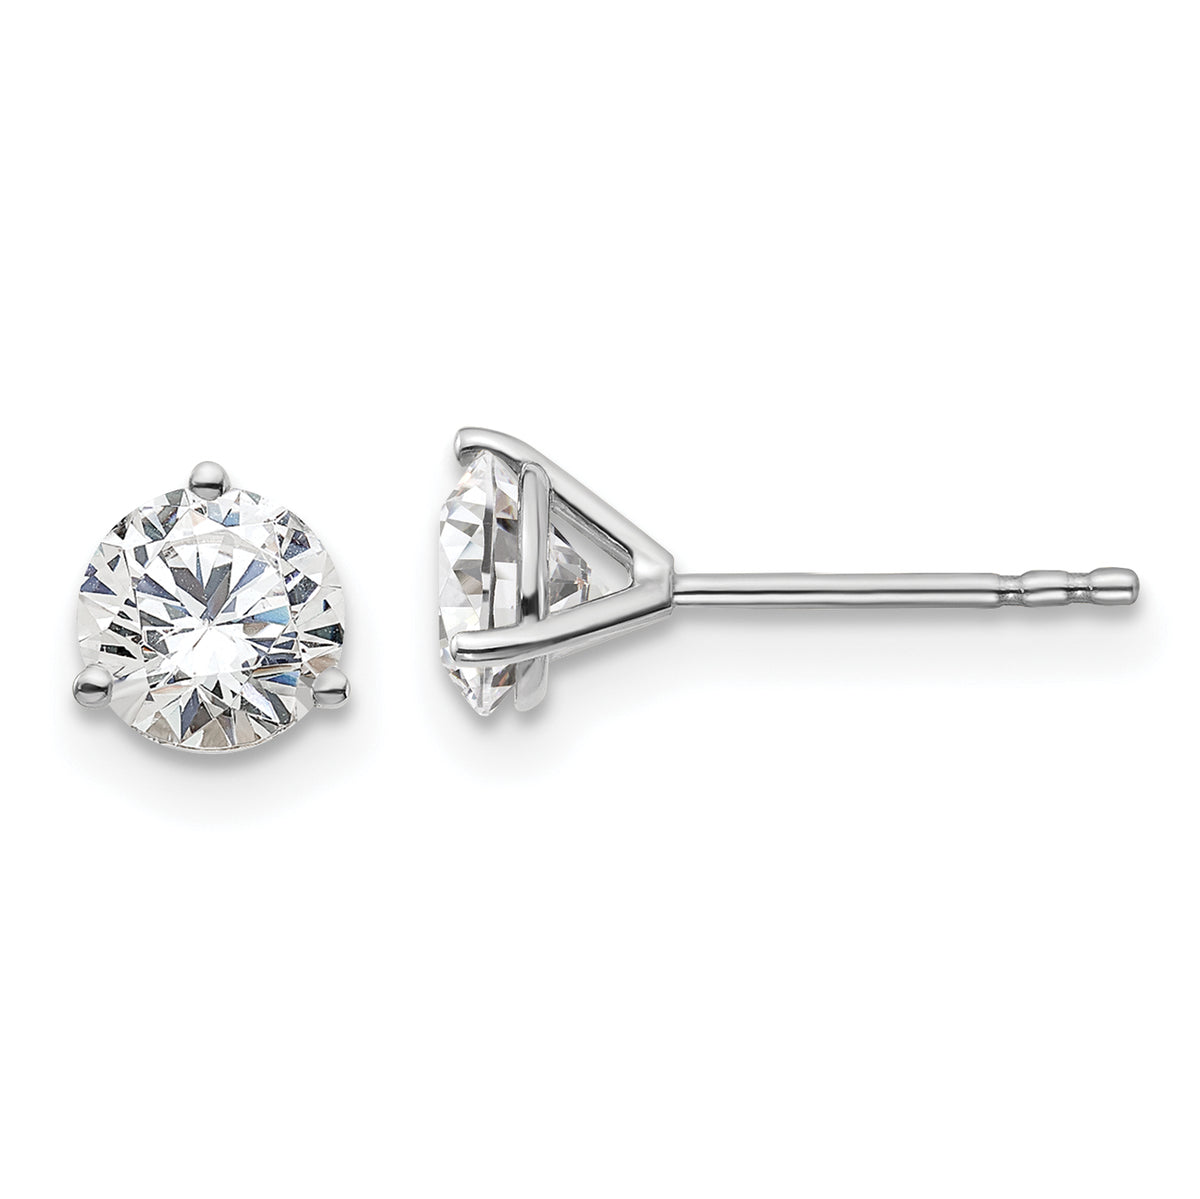 14k White Gold 1 1/4 carat total weight Round VS/SI DEF Lab Grown Diamond 3 Prong Stud Post Earrings